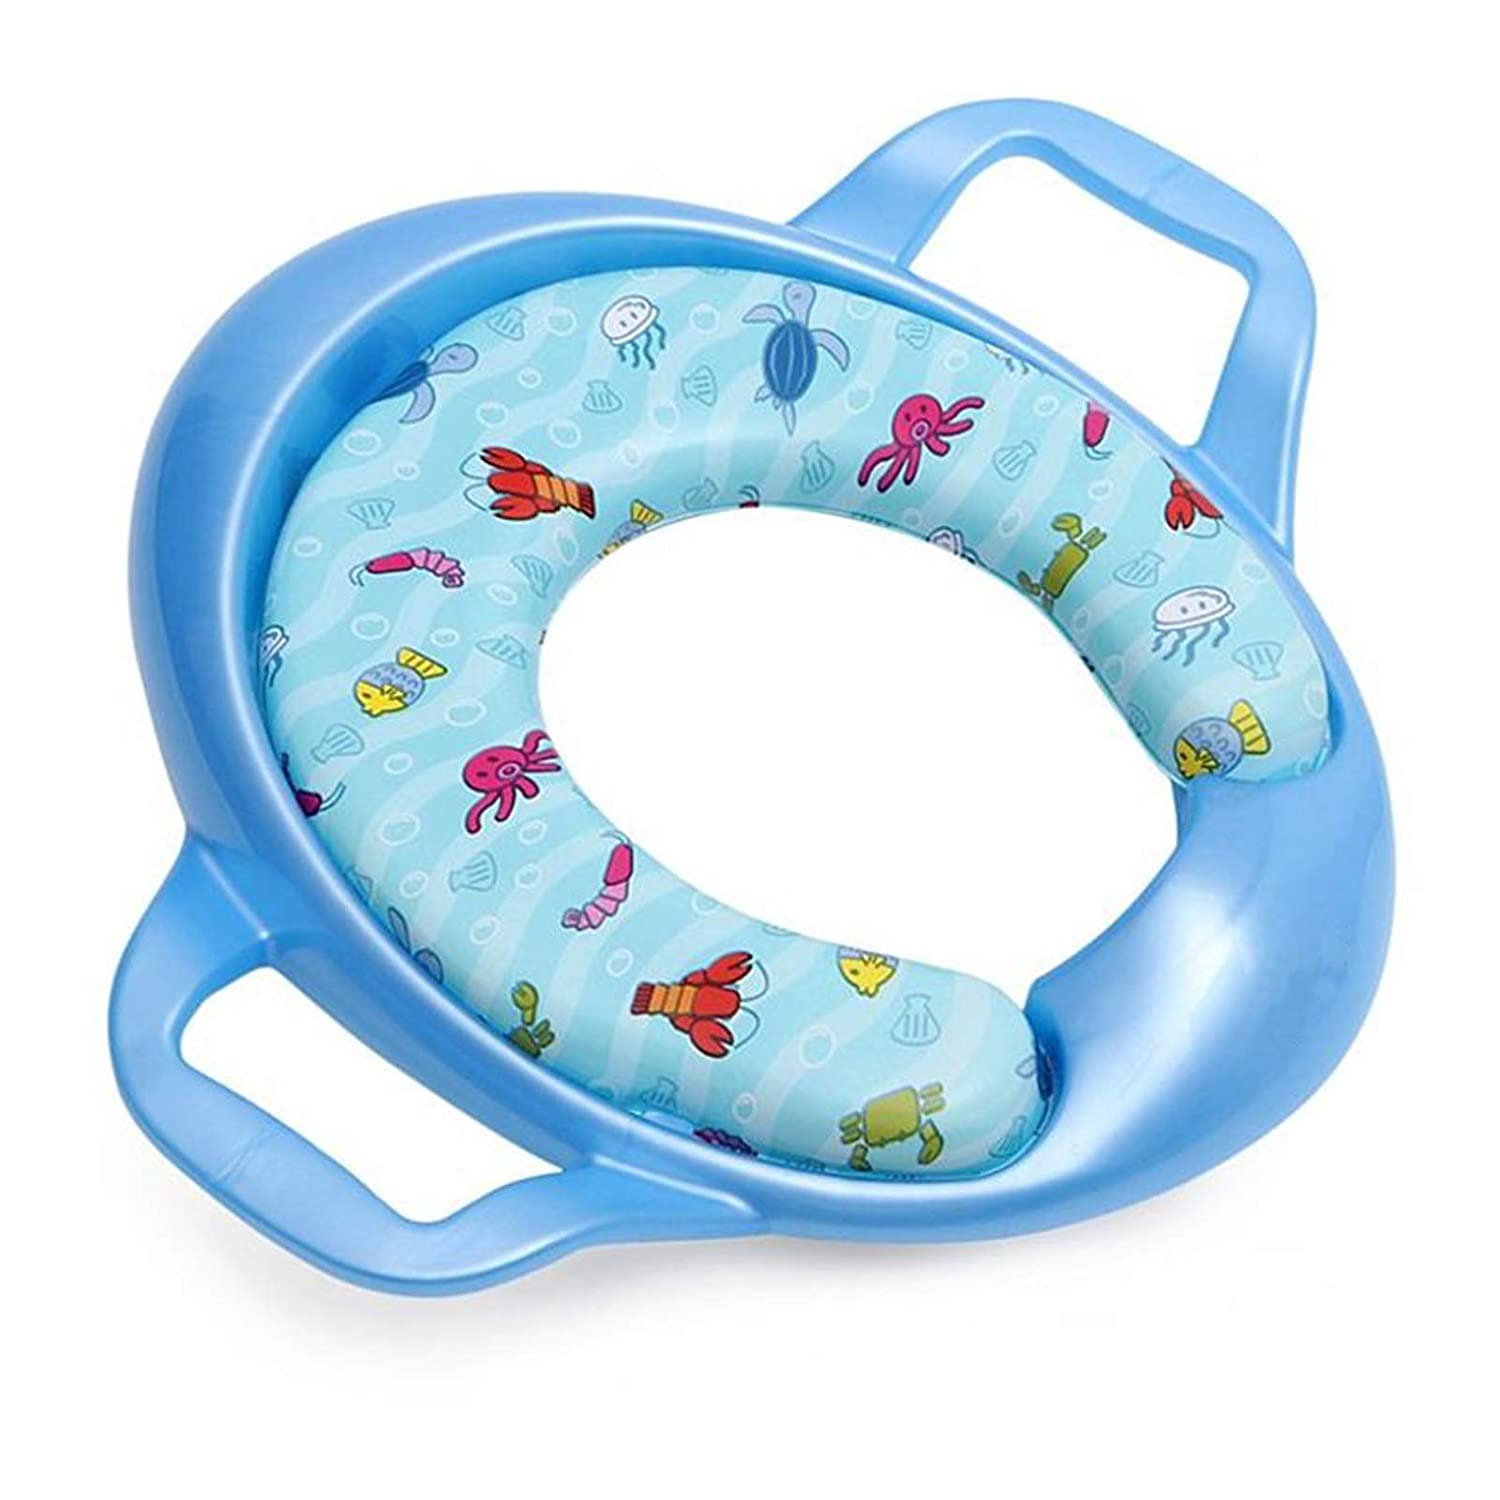 baby toilet seat for toddlers Baby soft toilet training seat cushion child seat with handles baby